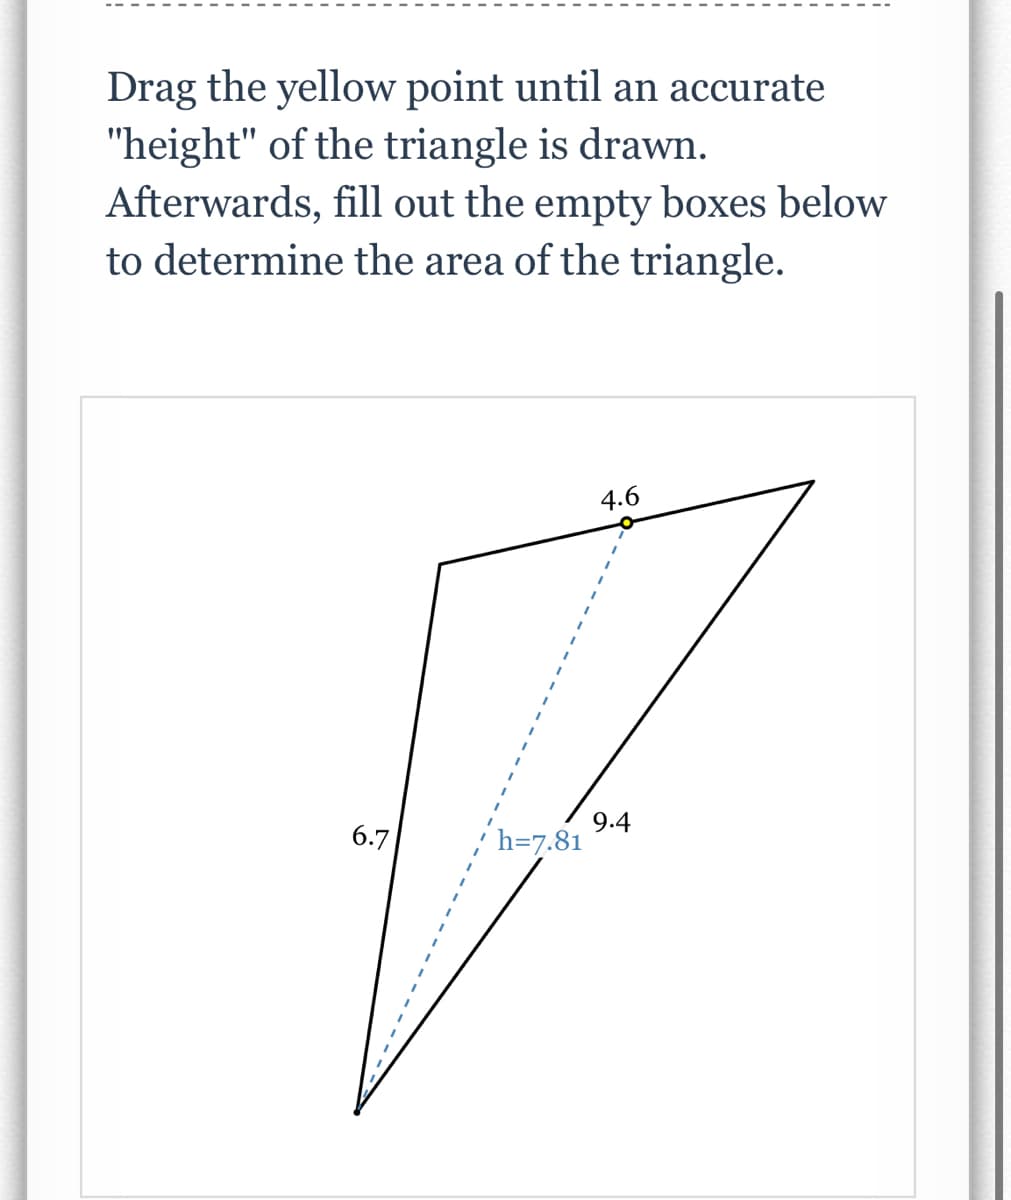 Drag the yellow point until an accurate
"height" of the triangle is drawn.
Afterwards, fill out the empty boxes below
to determine the area of the triangle.
4.6
9.4
h=7.81
6.7
